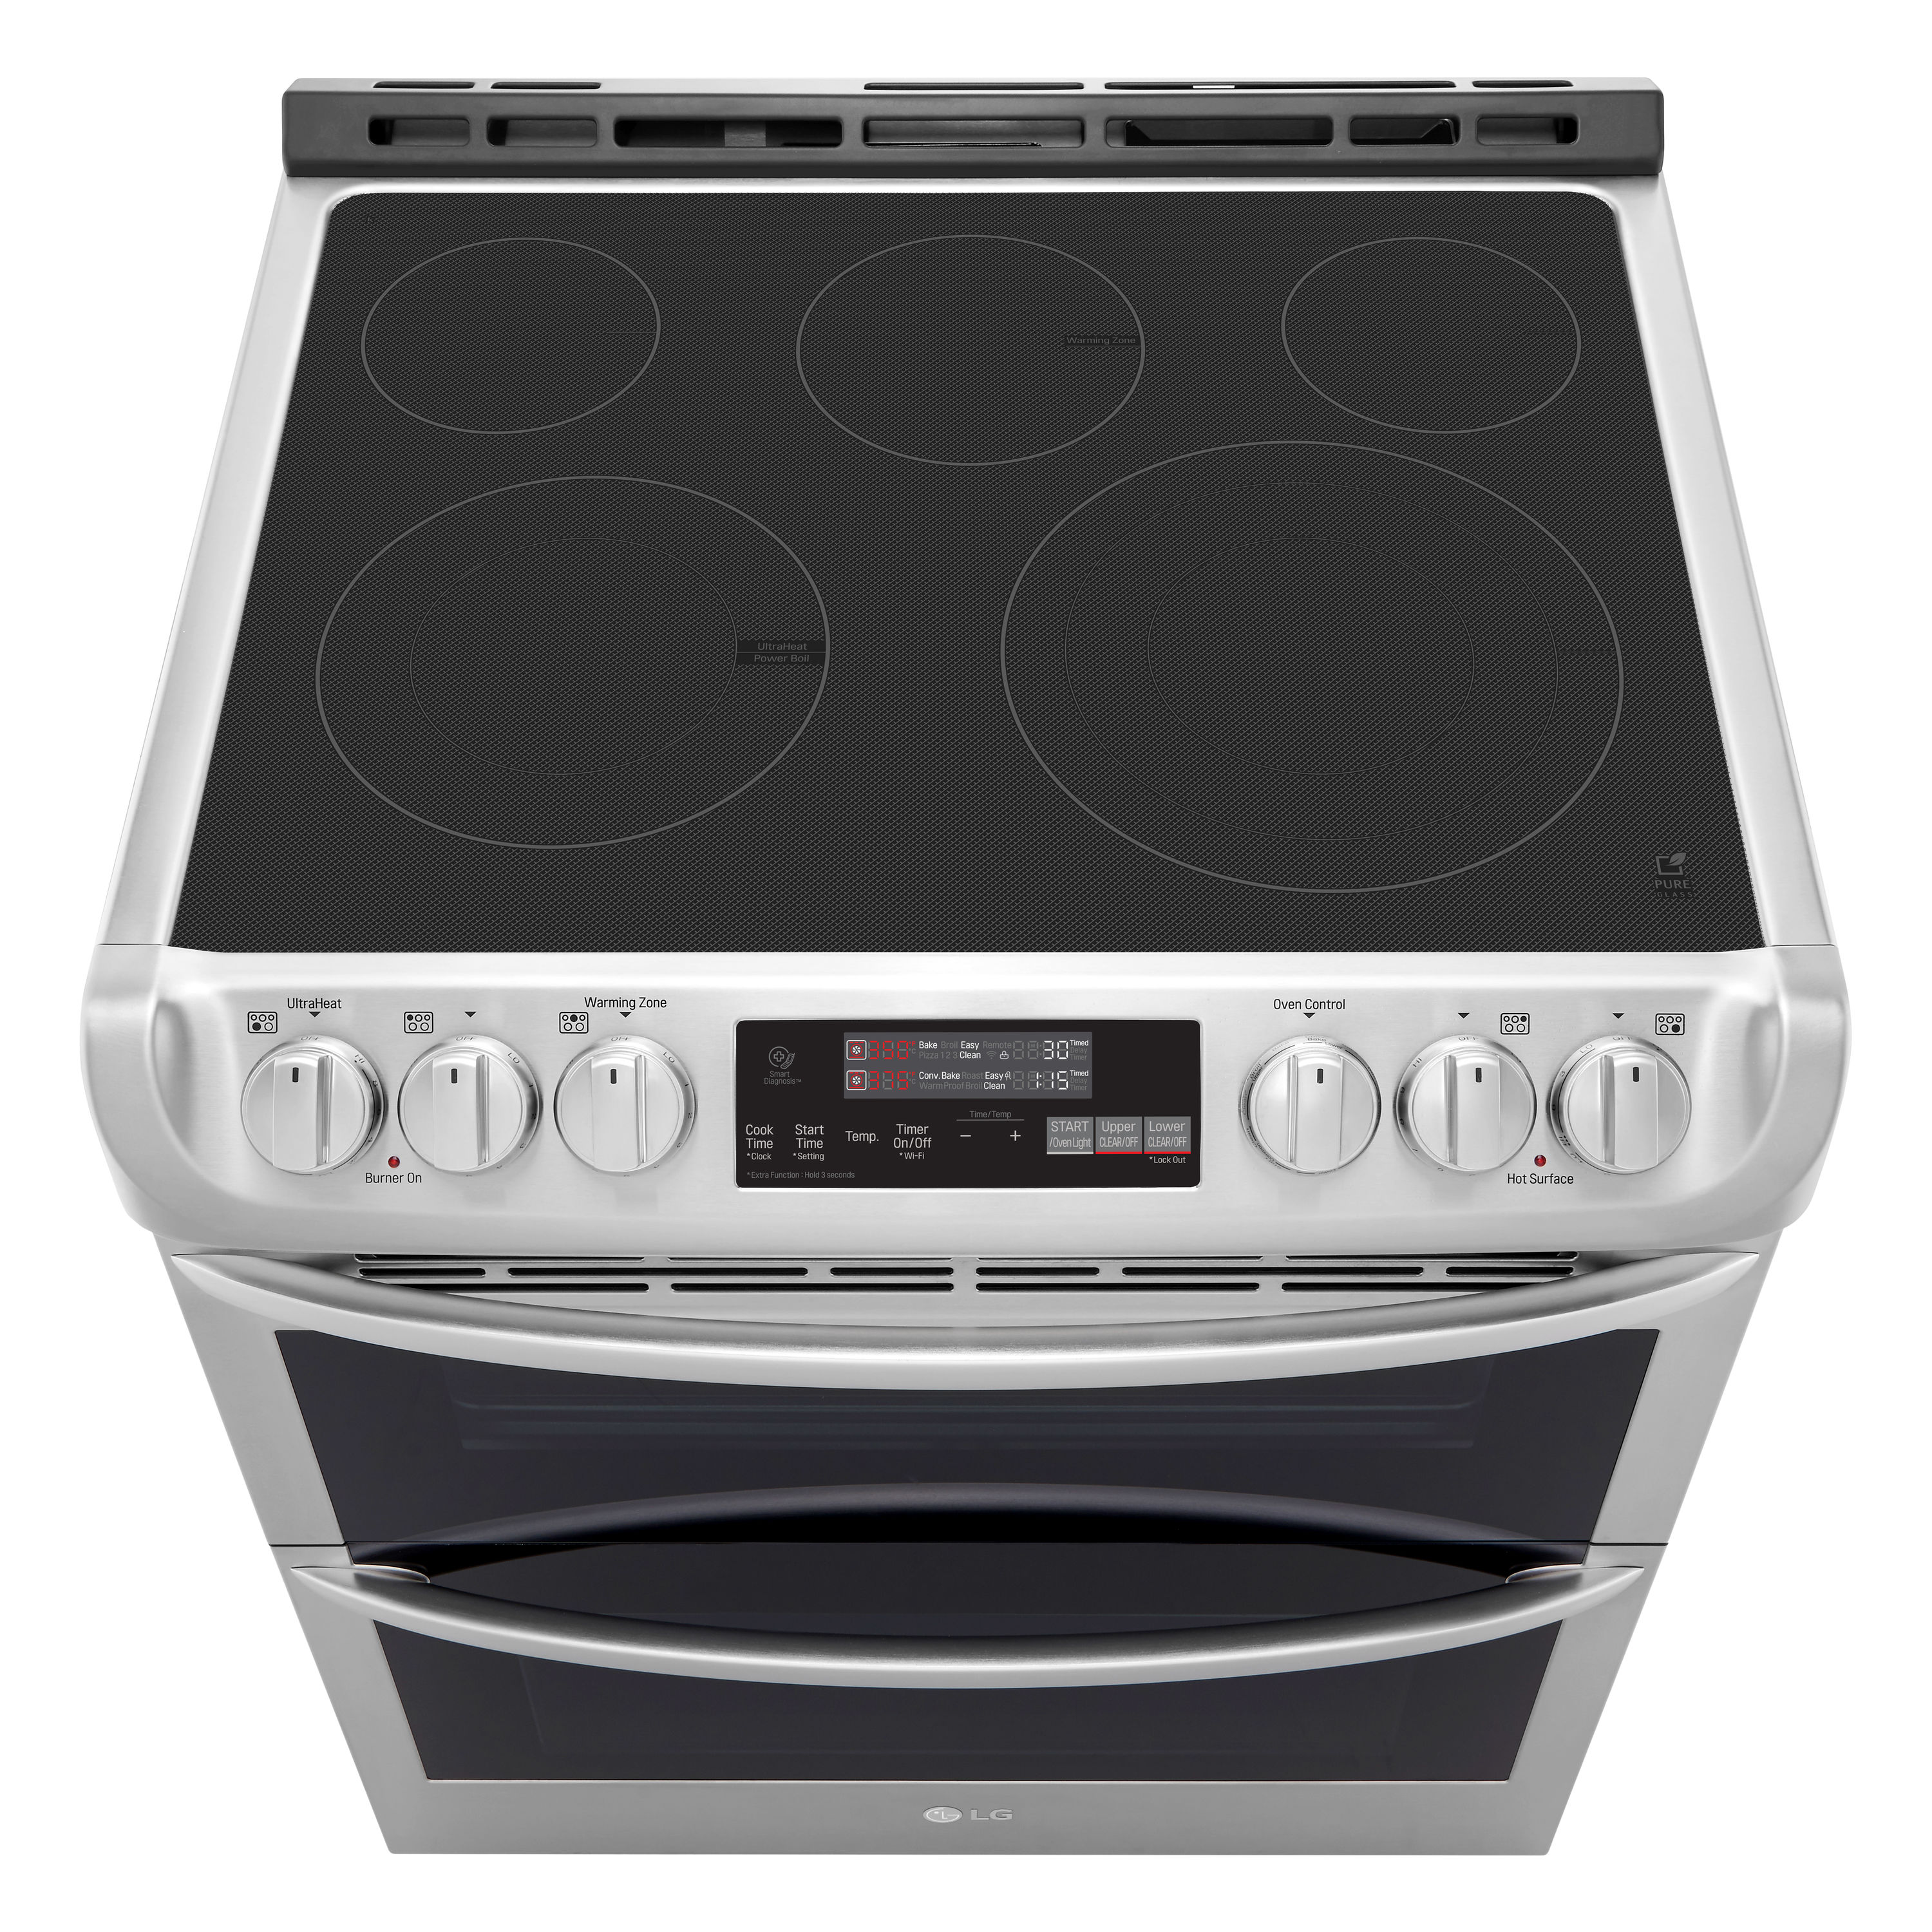 LG 7.3 Cu.Ft. Electric Double Oven Range with ProBake Convection, EasyClean , SmoothTouch, 5 Element, Stainless Steel - Silver